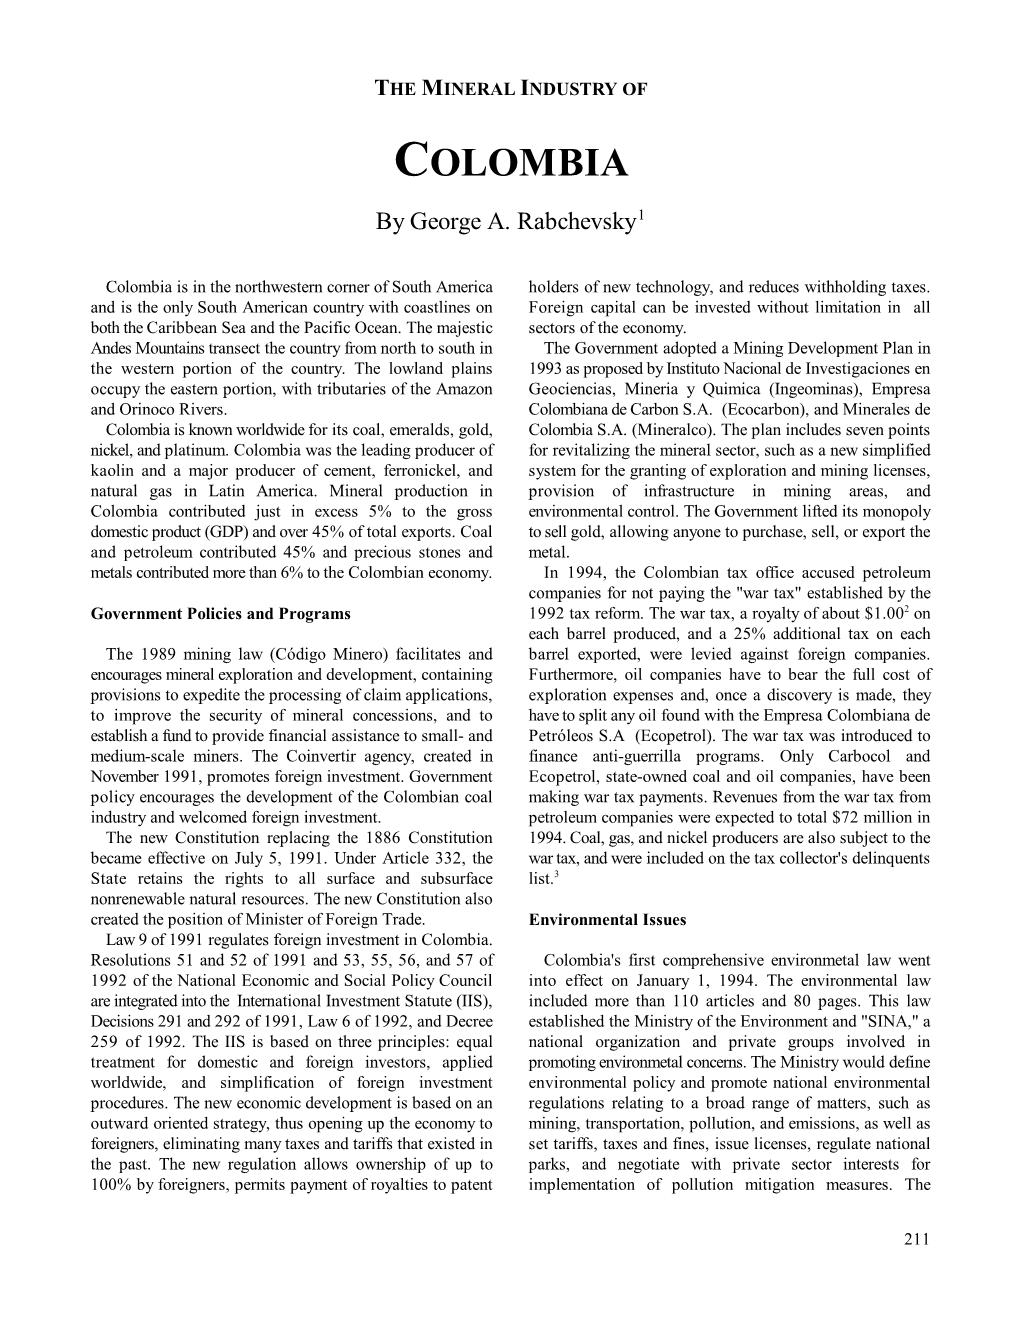 COLOMBIA by George A